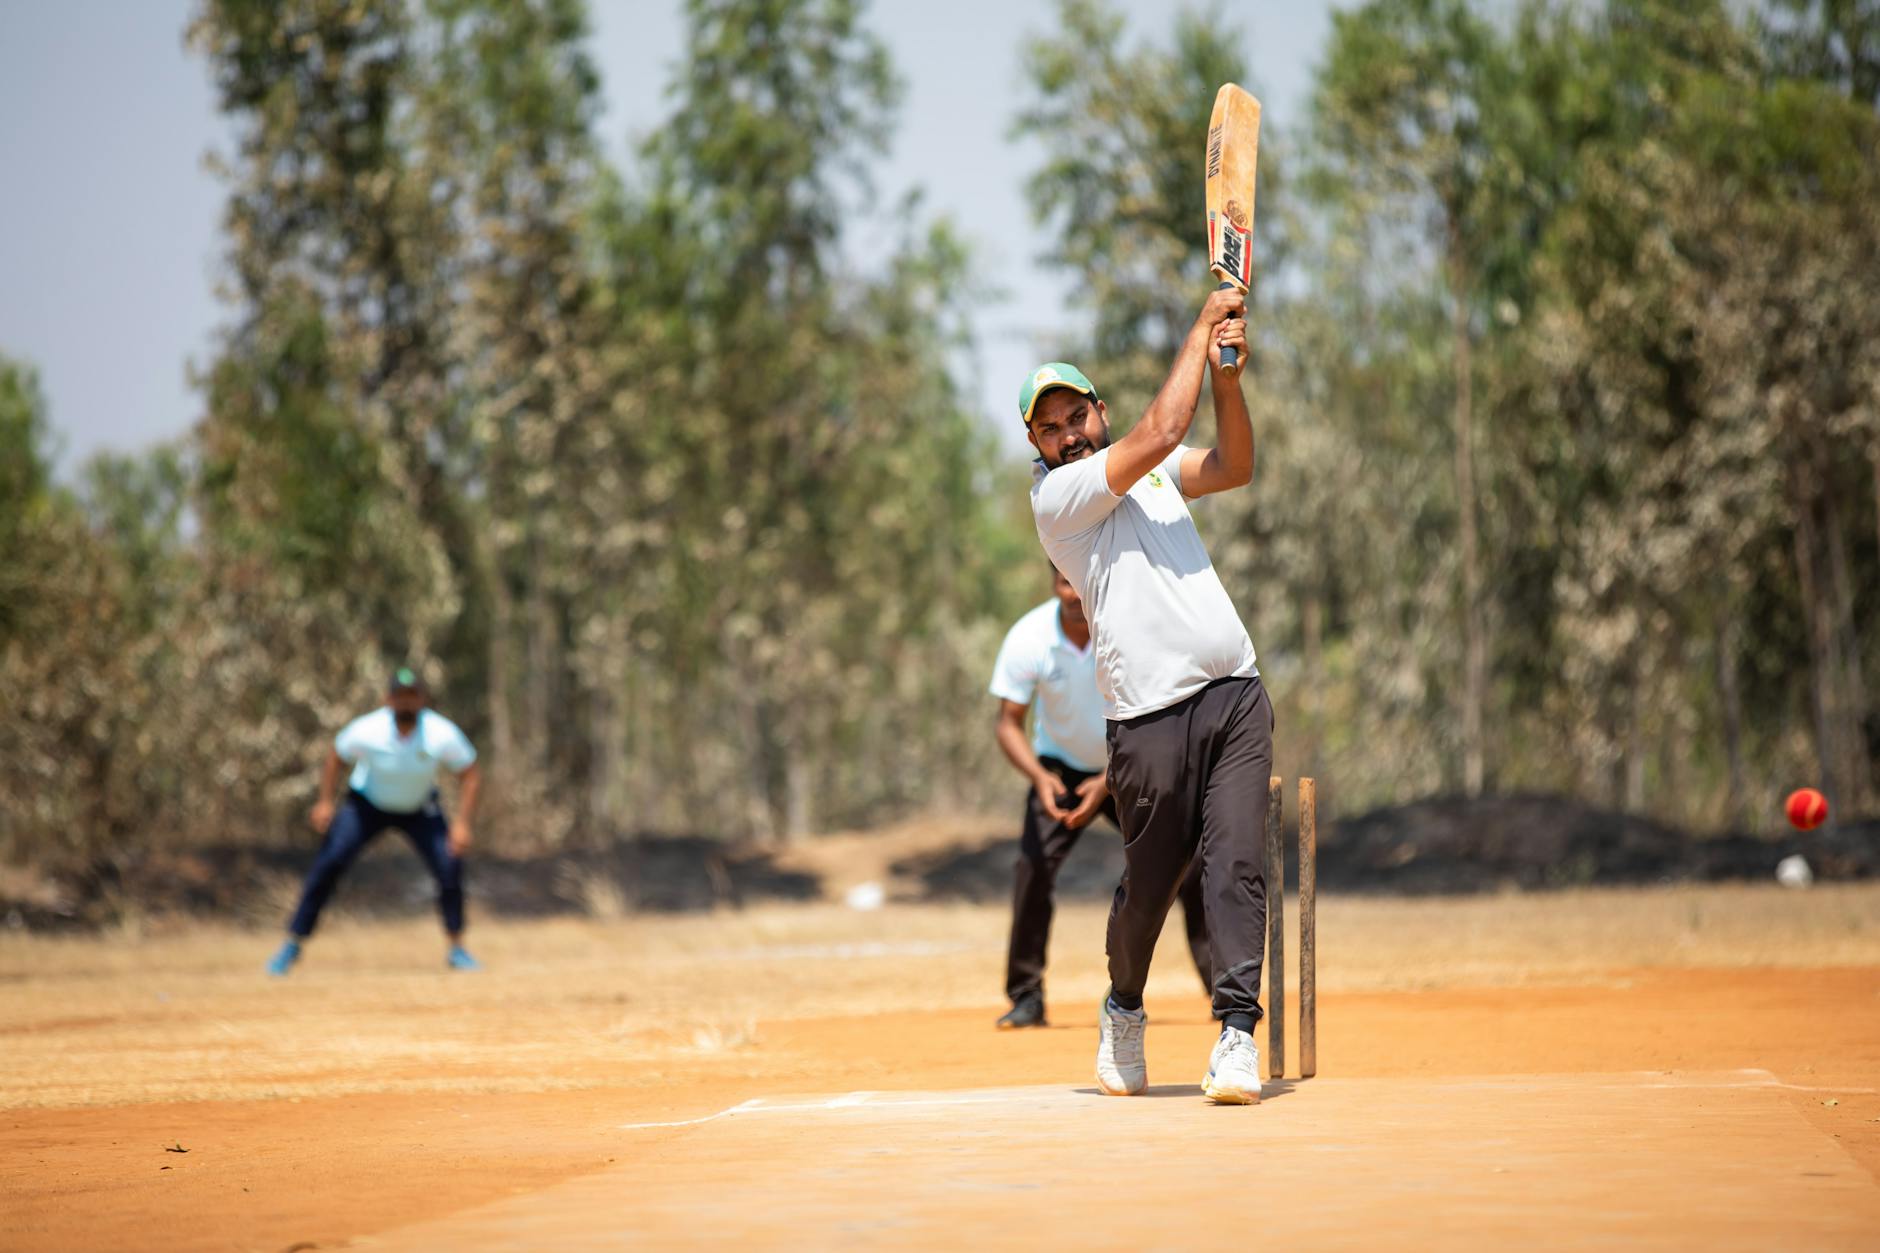 man in cricket game